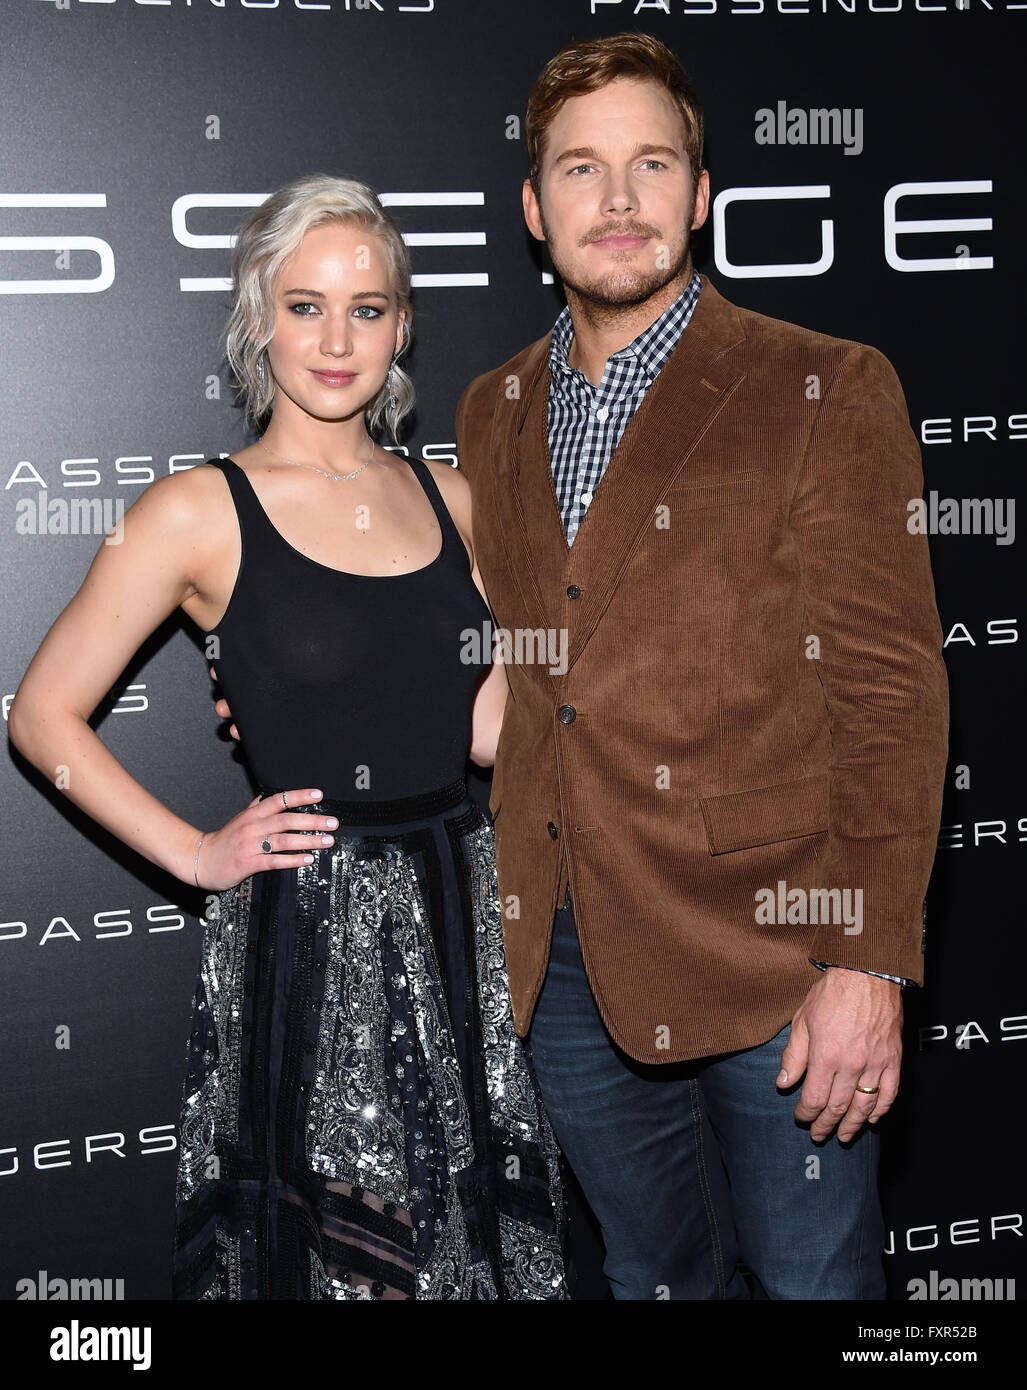 Las Vegas, Nevada, USA. 17th Apr, 2016. Jennifer Lawrence & Chris Pratt arrives for the CinemaCon 2016: Sony Pictures Presentation of 2016 Films at Caesar's Palace. Credit:  Lisa O'Connor/ZUMA Wire/Alamy Live News Stock Photo